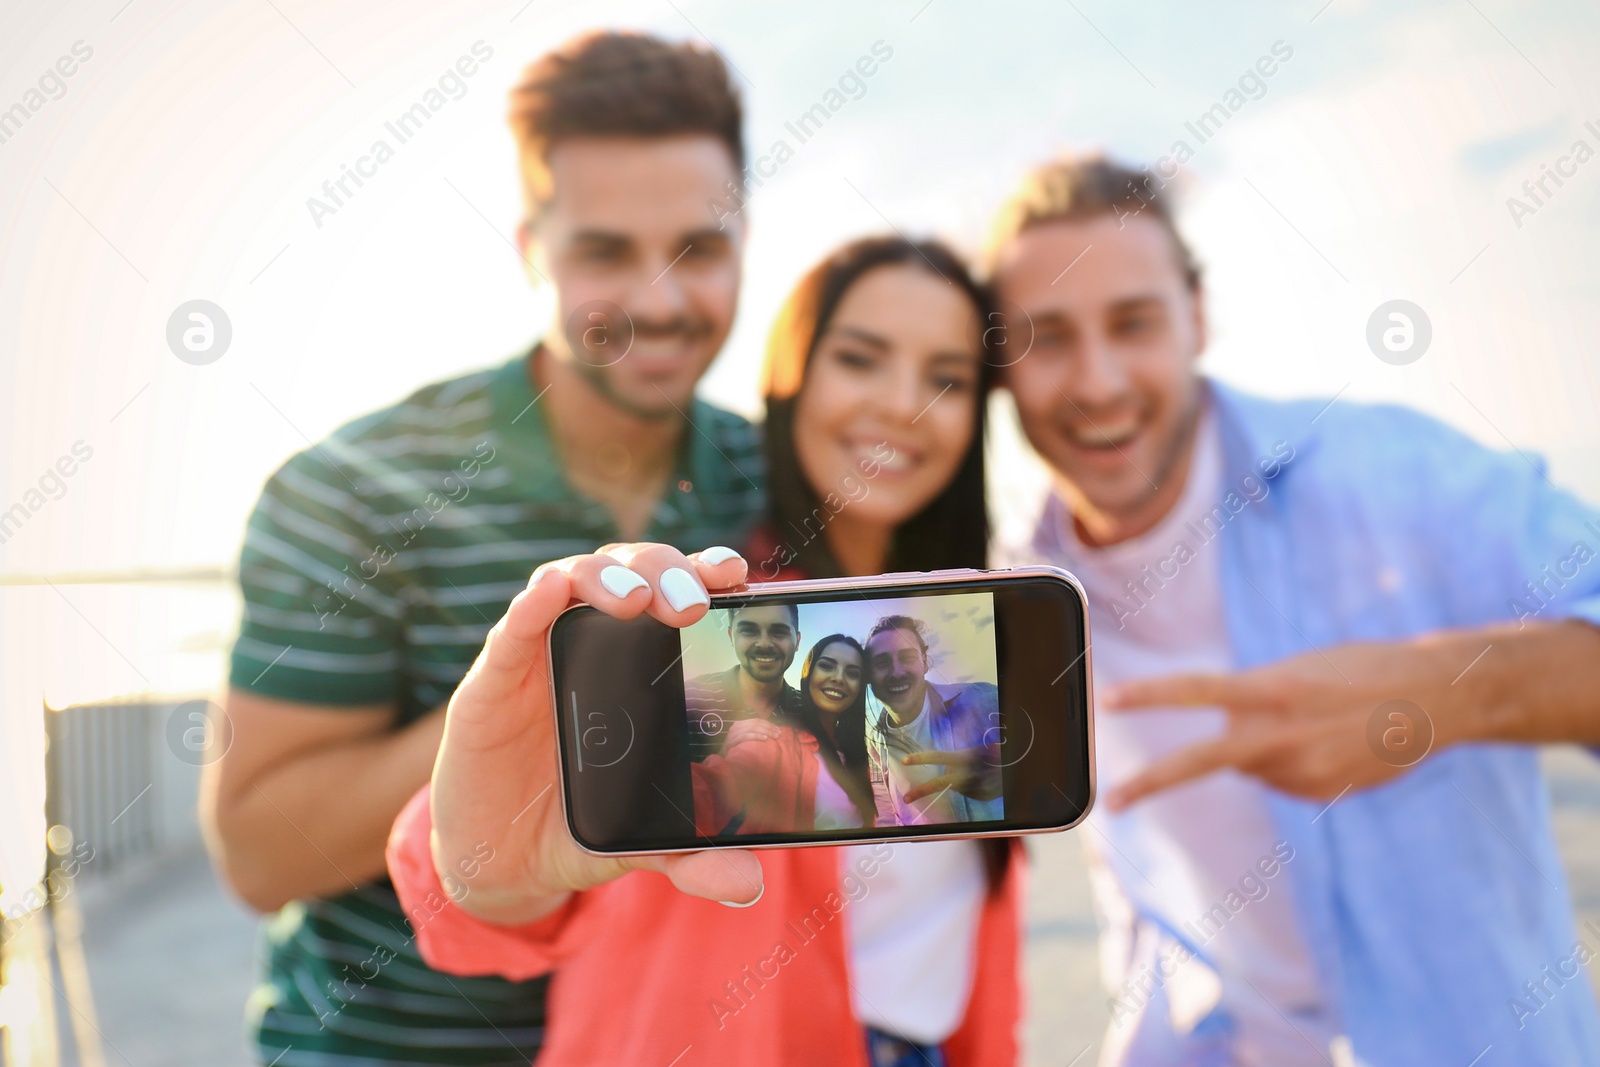 Photo of Happy young people taking selfie outdoors, focus on smartphone